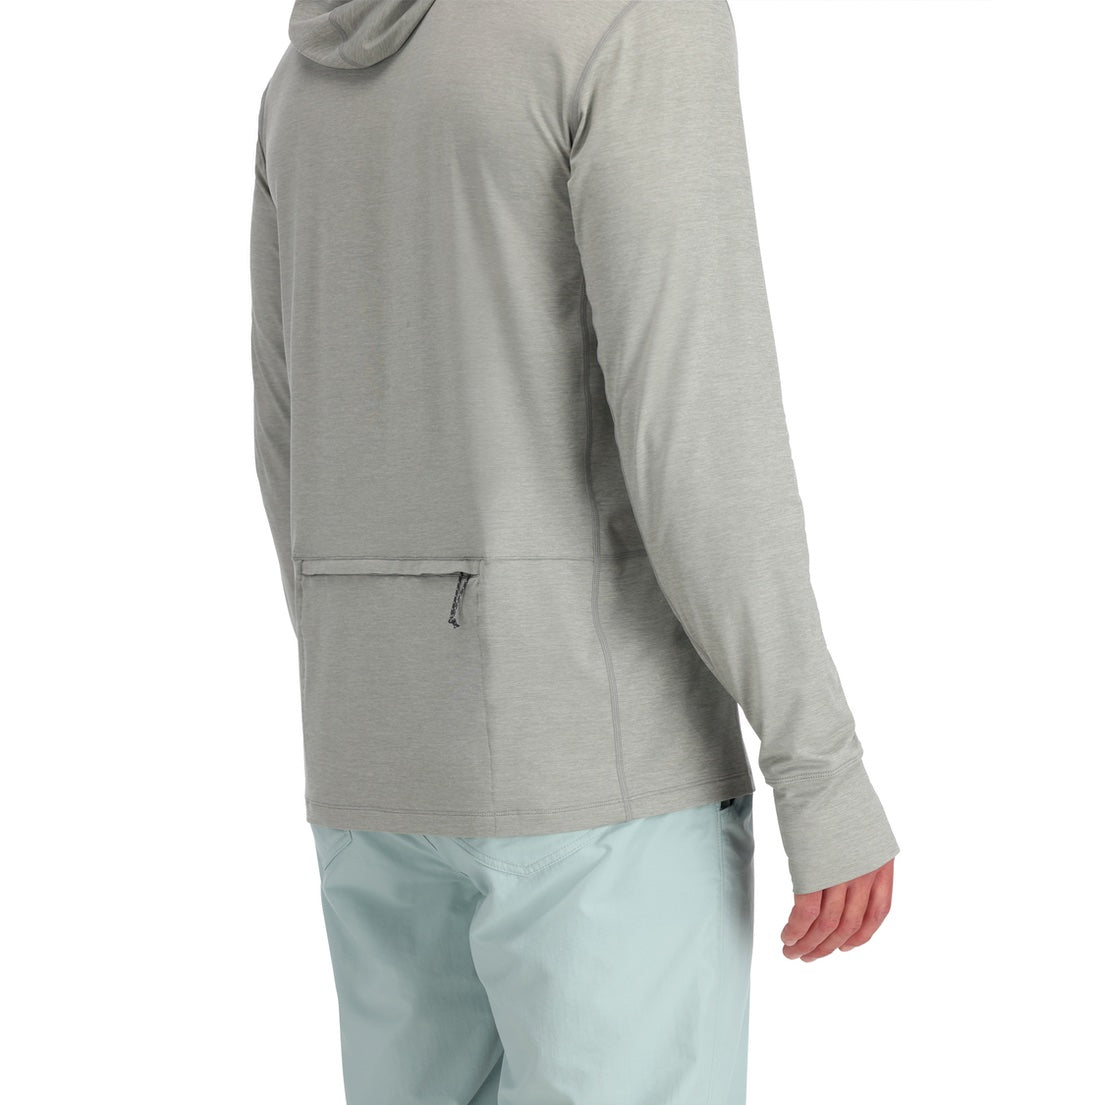 Simms M's SolarFlex Guide Cooling Hoody